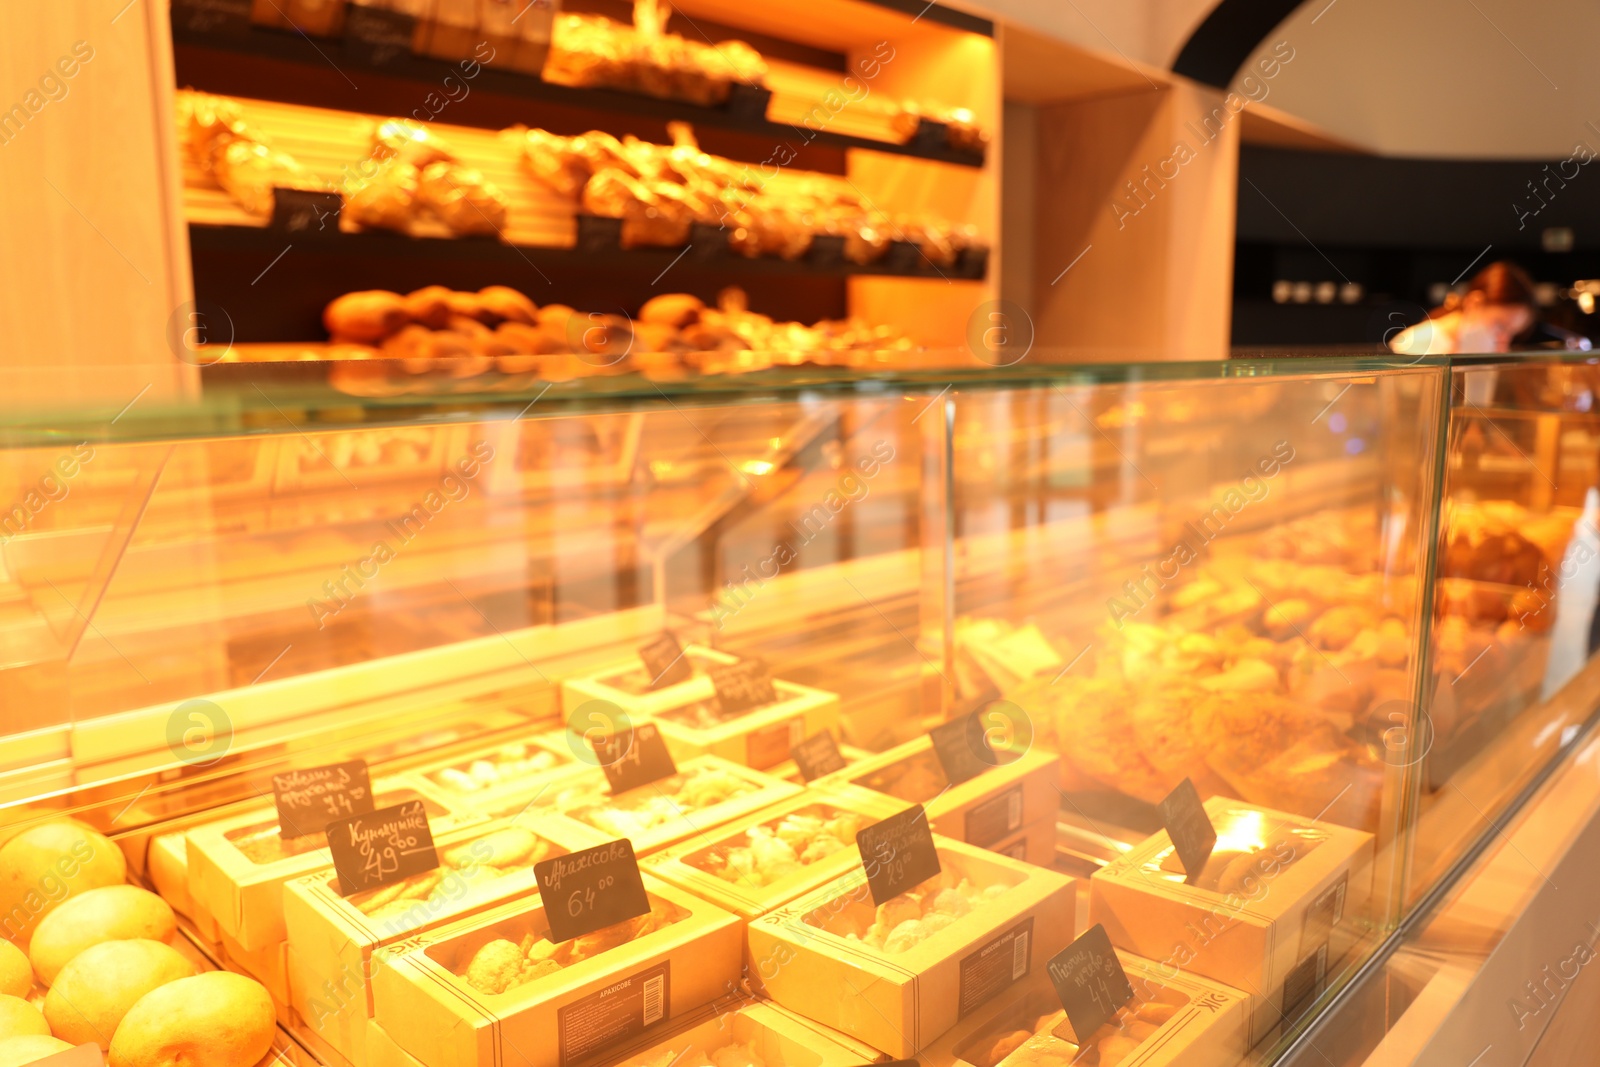 Photo of Fresh pastries on counter in bakery store